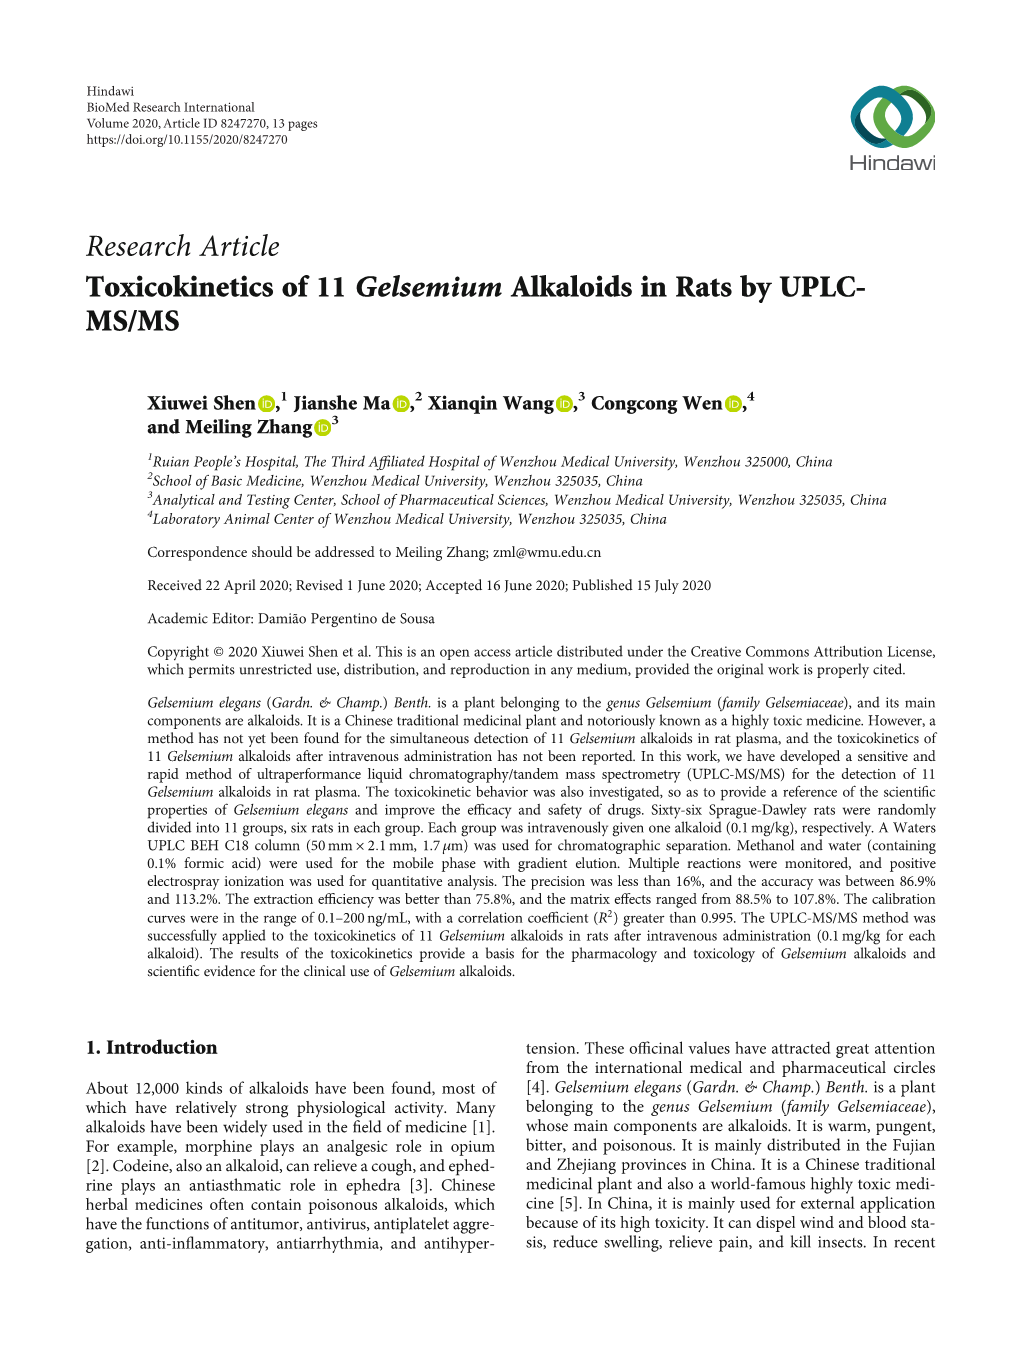 Toxicokinetics of 11 Gelsemium Alkaloids in Rats by UPLC-MS/MS